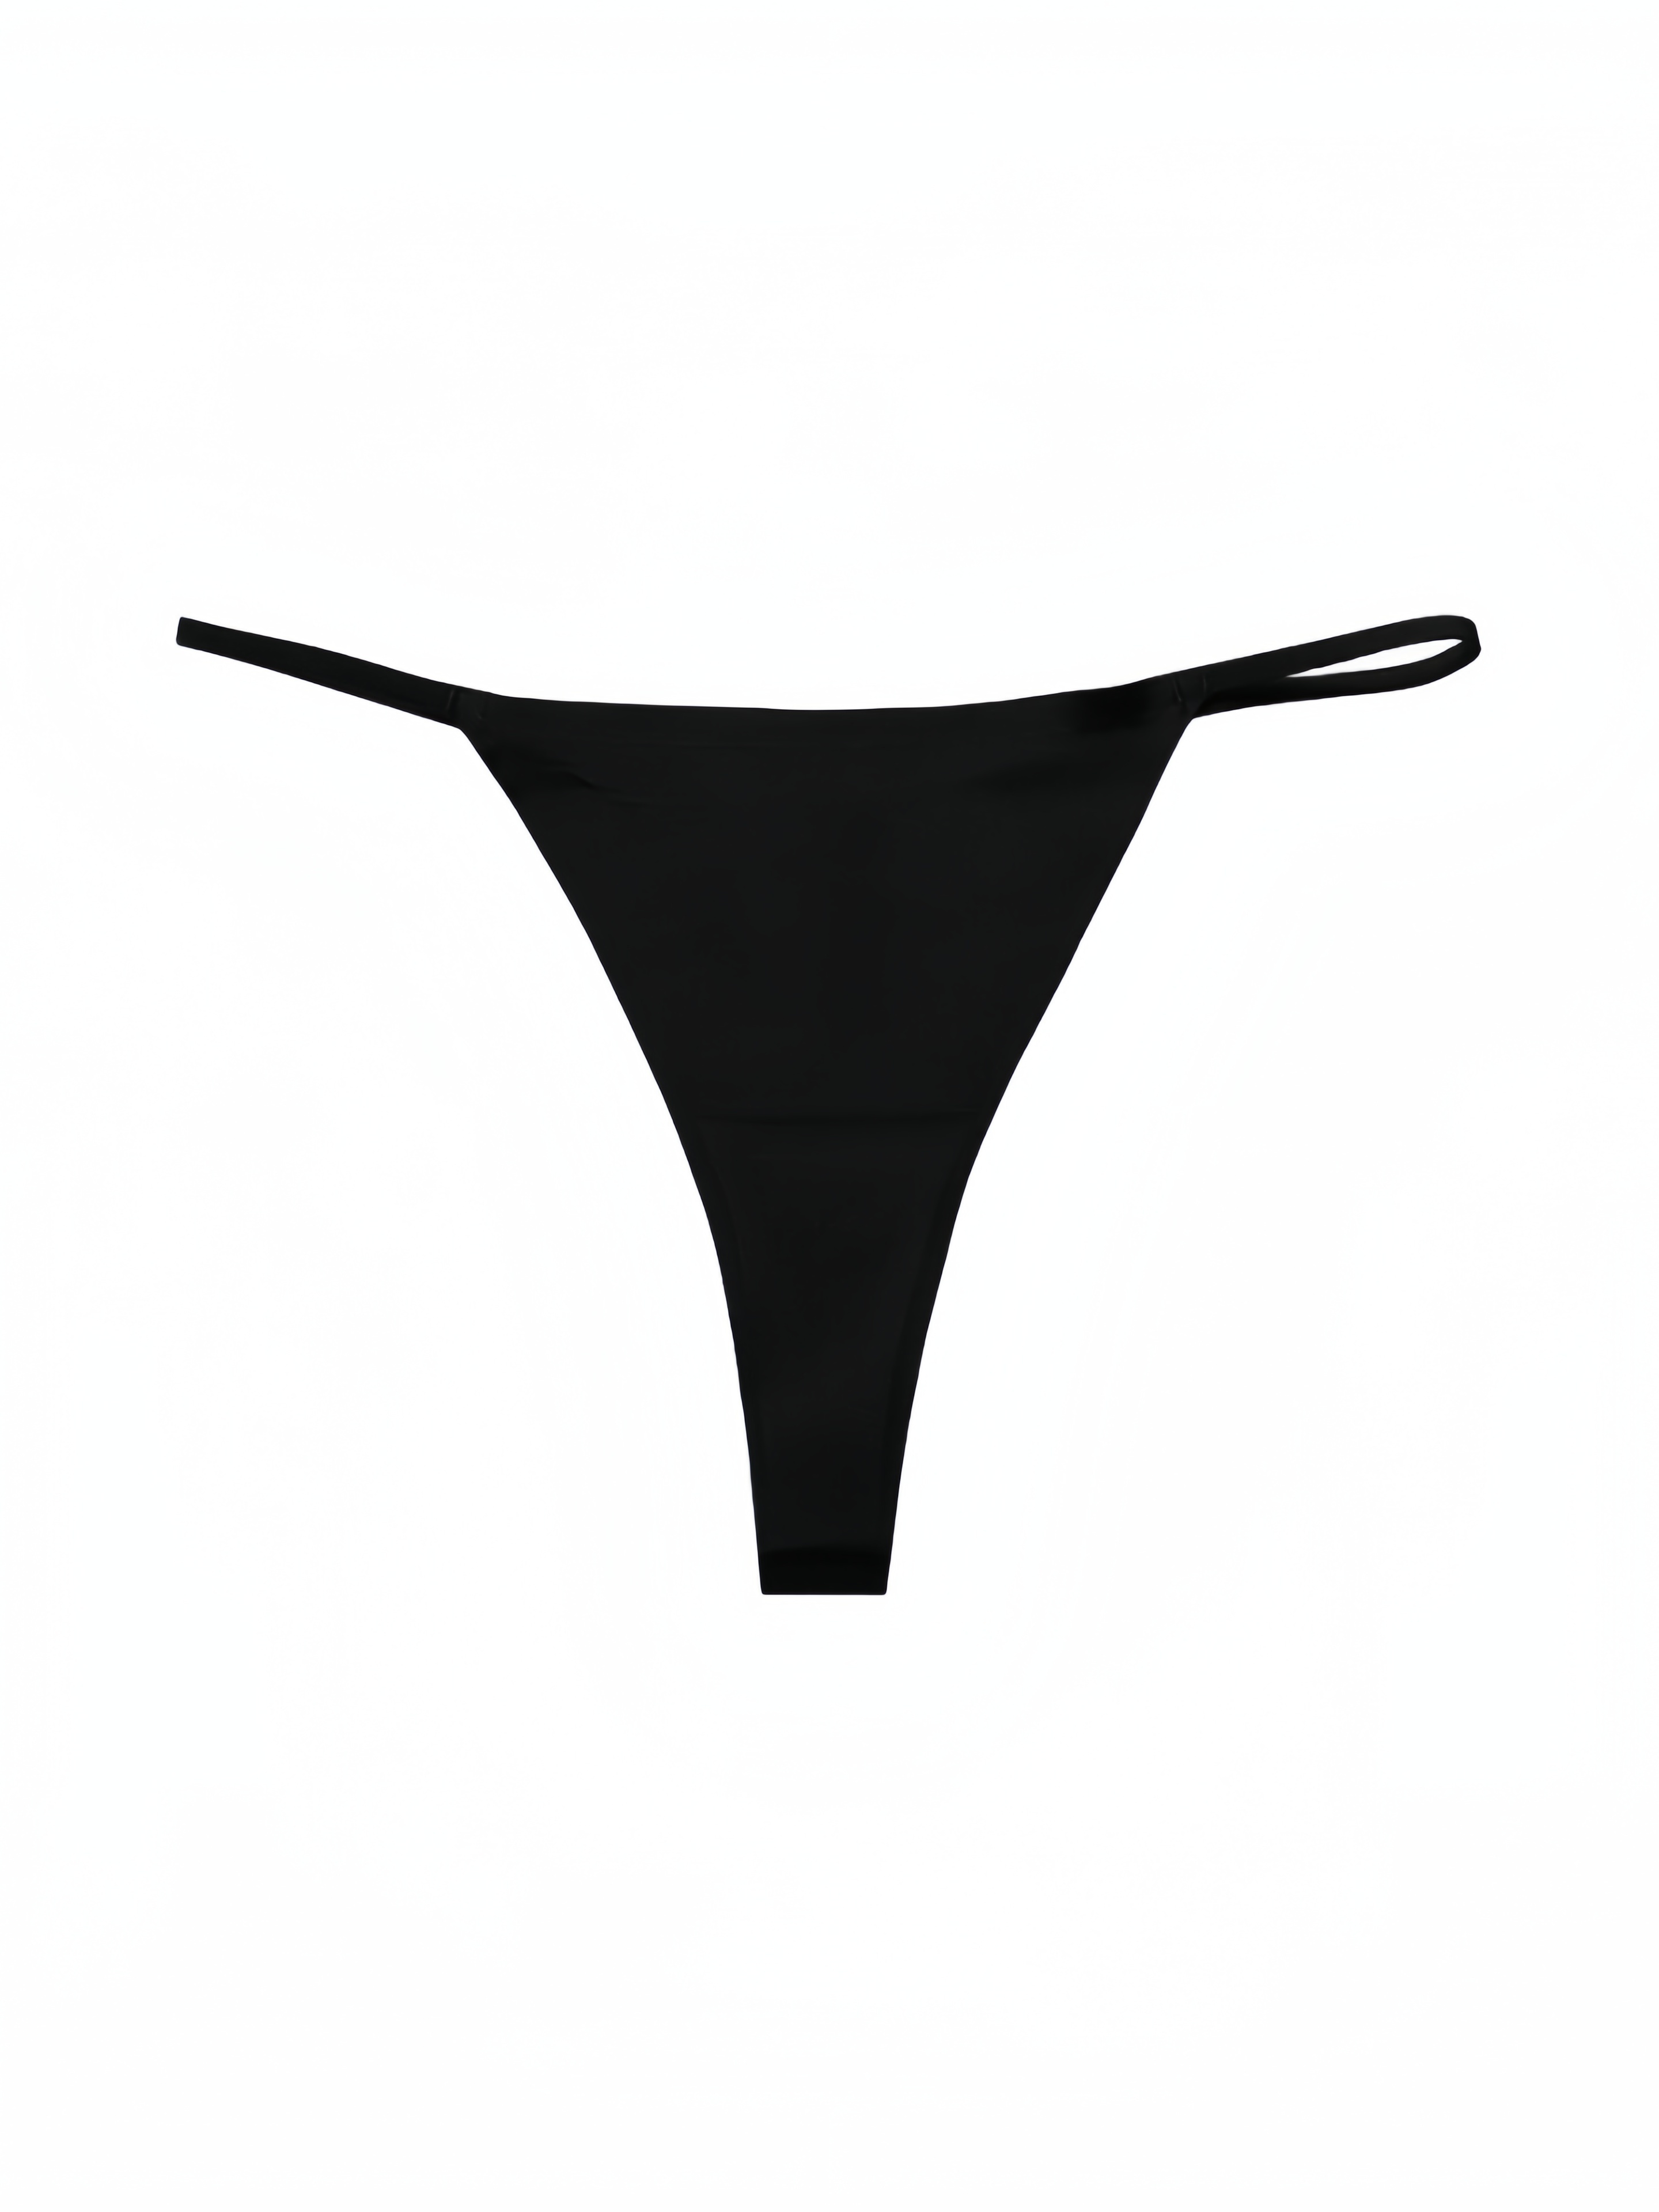 Men Open Ring Pouch C-string Invisible Thong Underwear Briefs Panty  Lingerie - Black, as described